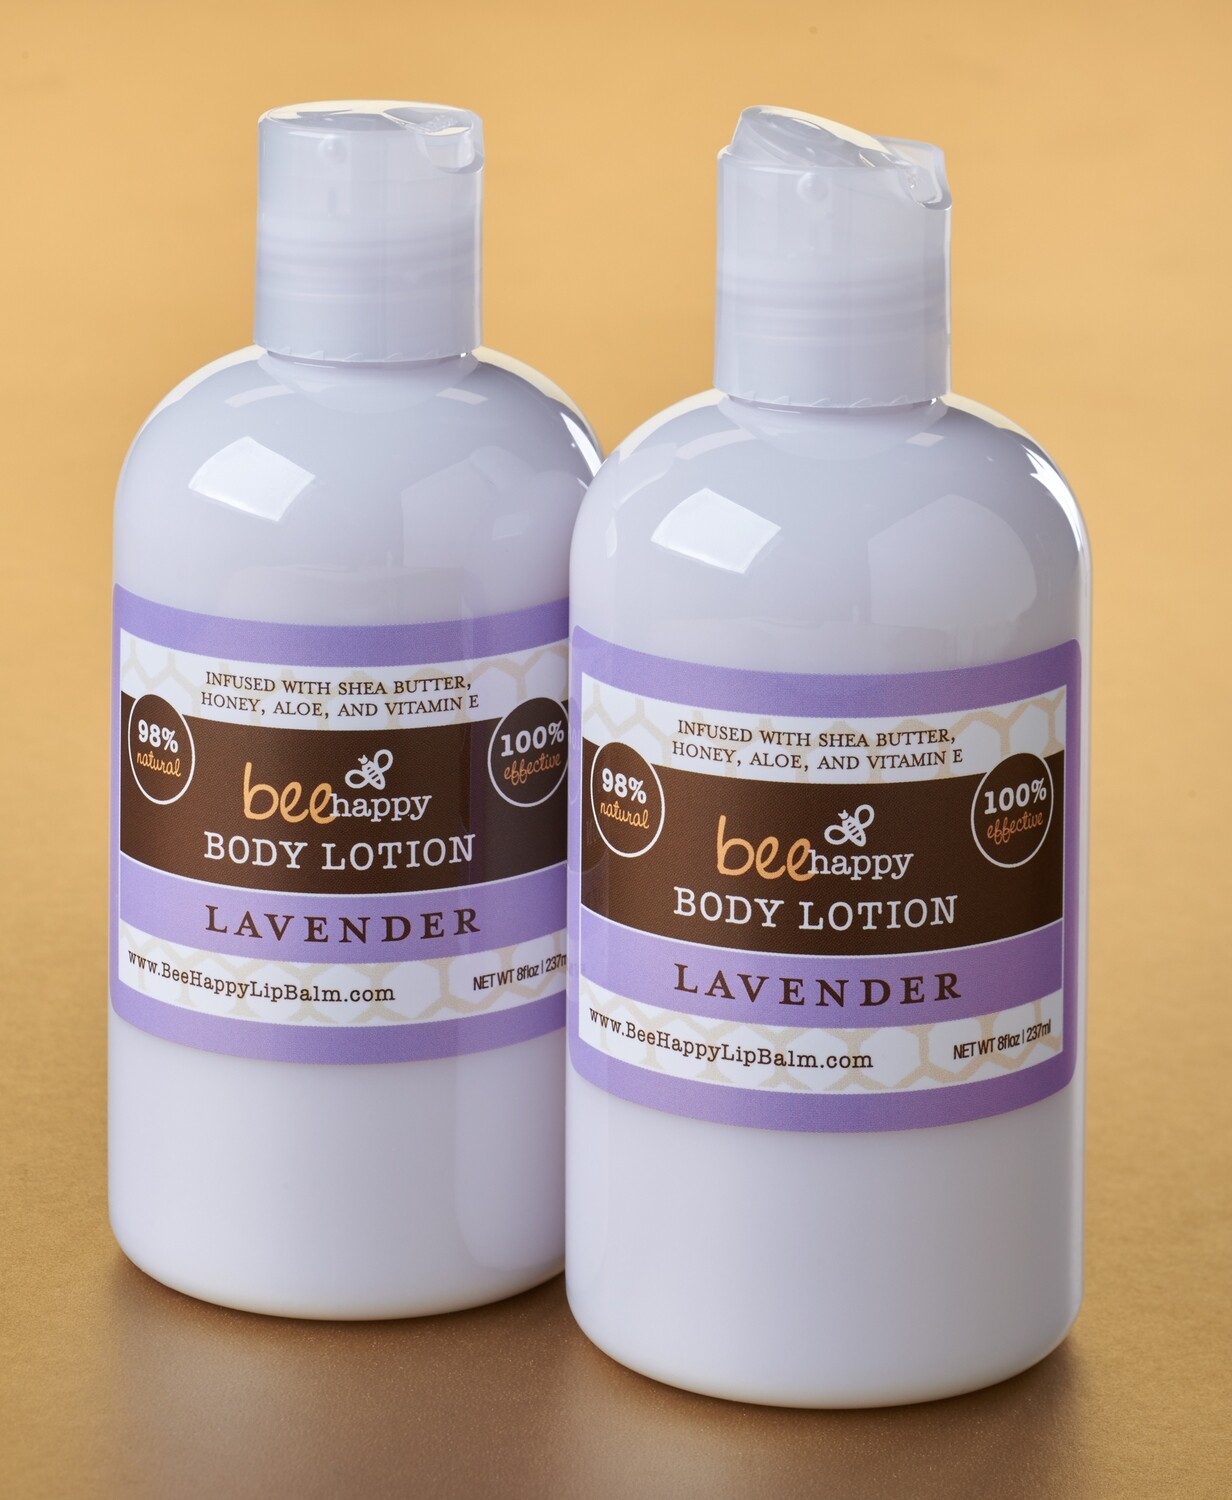 Body Lotion Lavender twin-pack (16 oz)